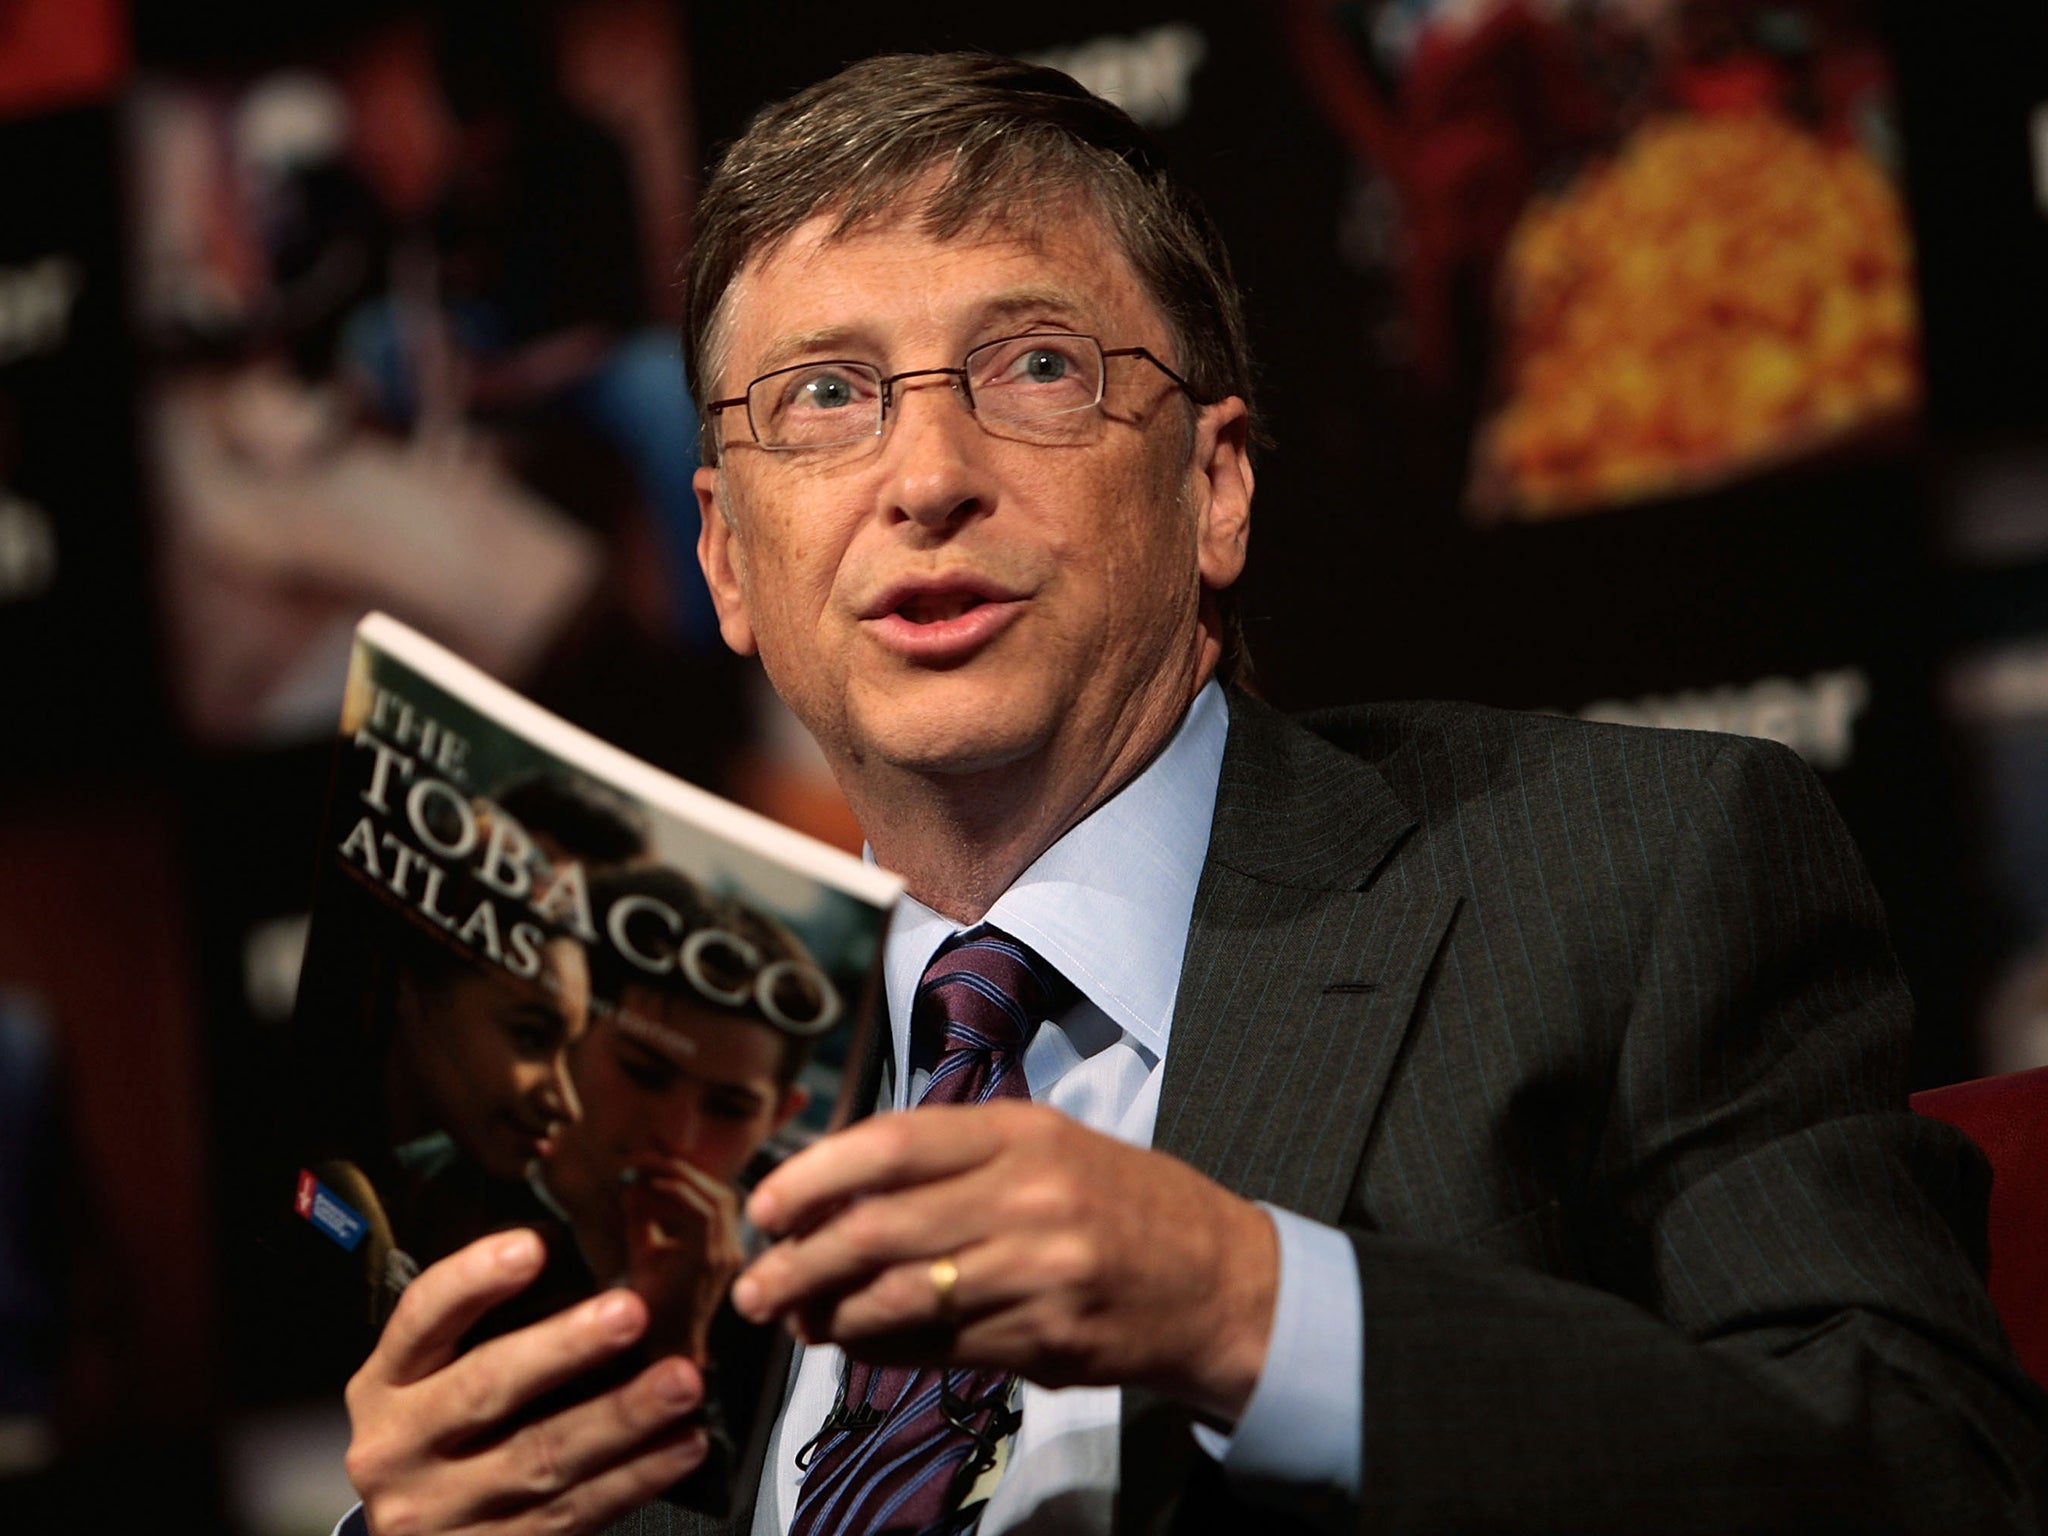 Bill Gates, like many of the world's wealthiest people, is a vivacious reader